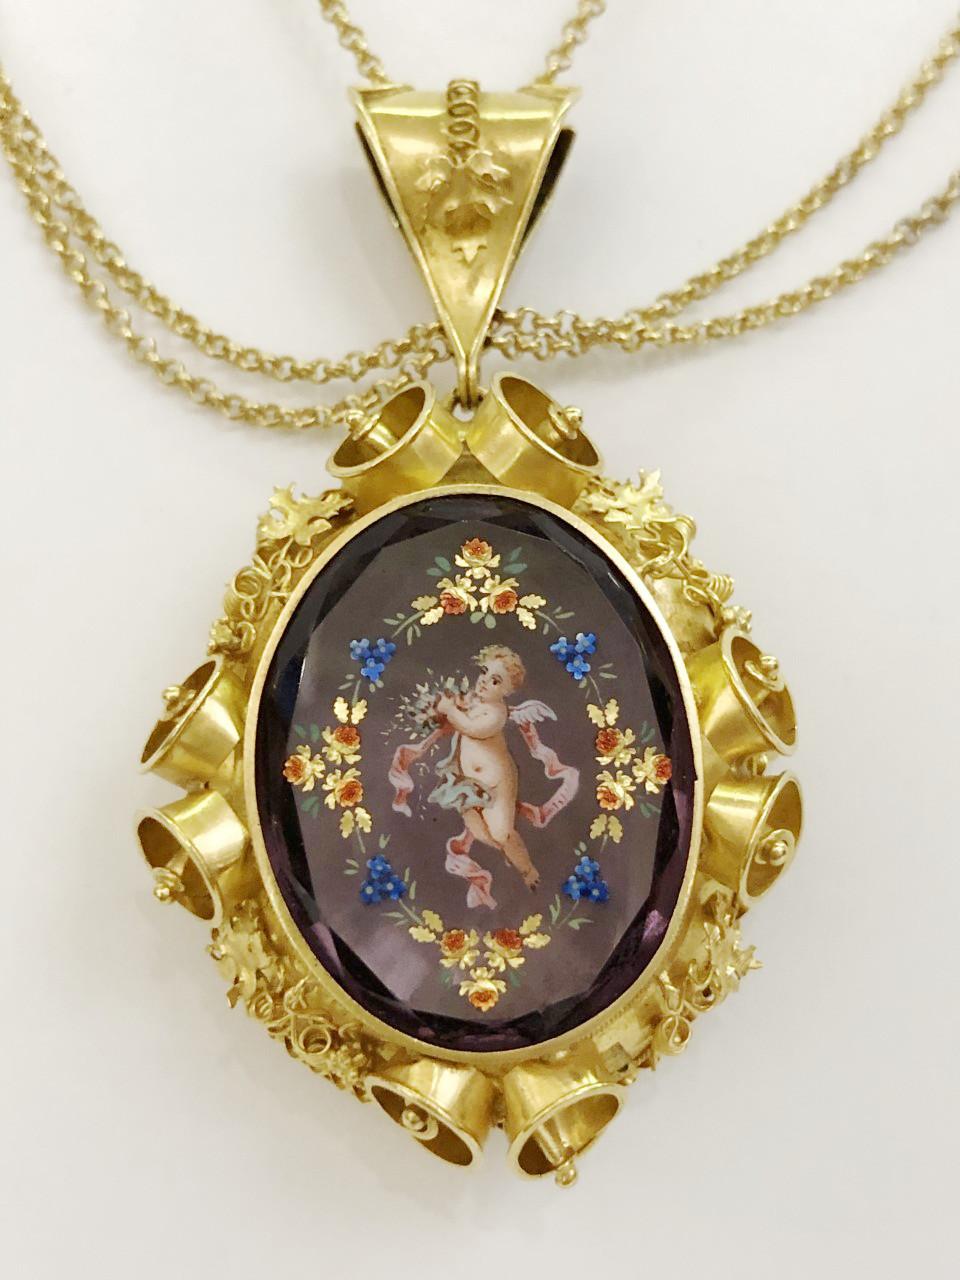 18 karat yellow gold necklace with three strands of chain, and a photo holder pendant with enameled amethyst and engraved with flowers and putto cartouche / Made in Italy 1860-1880s